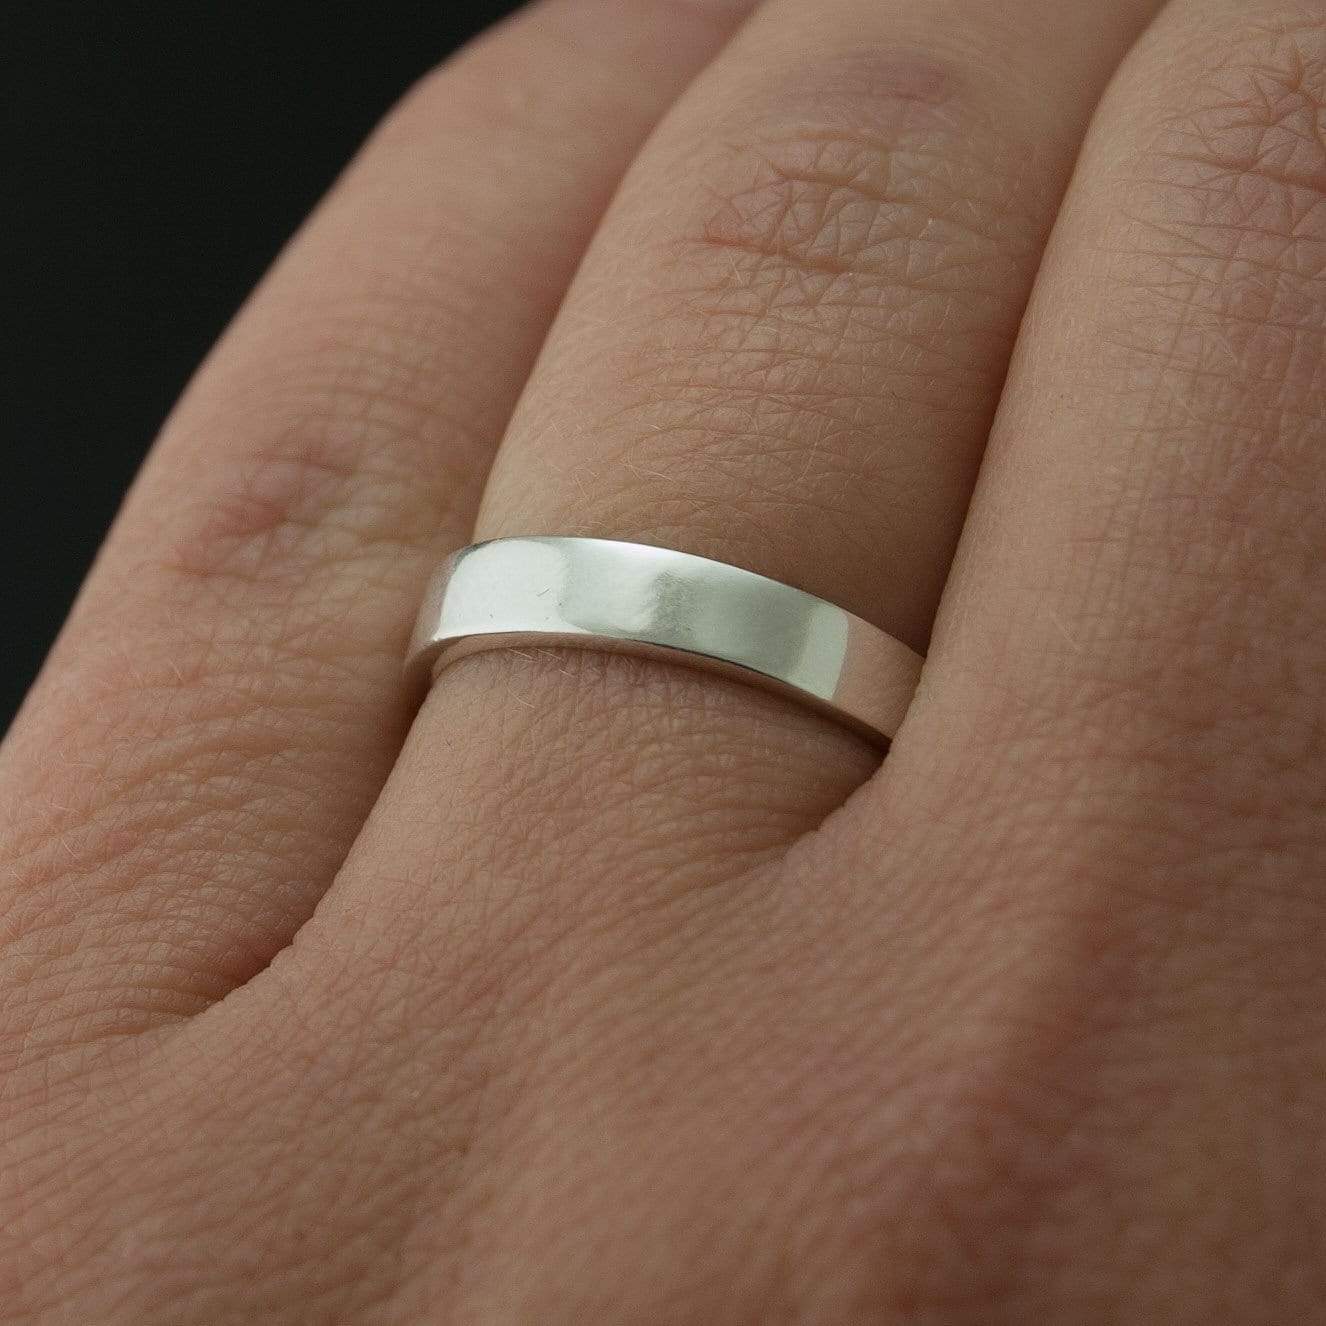 Simple Flat Style Wedding Bands, Set of 2 Wedding Rings Ring Set by Nodeform